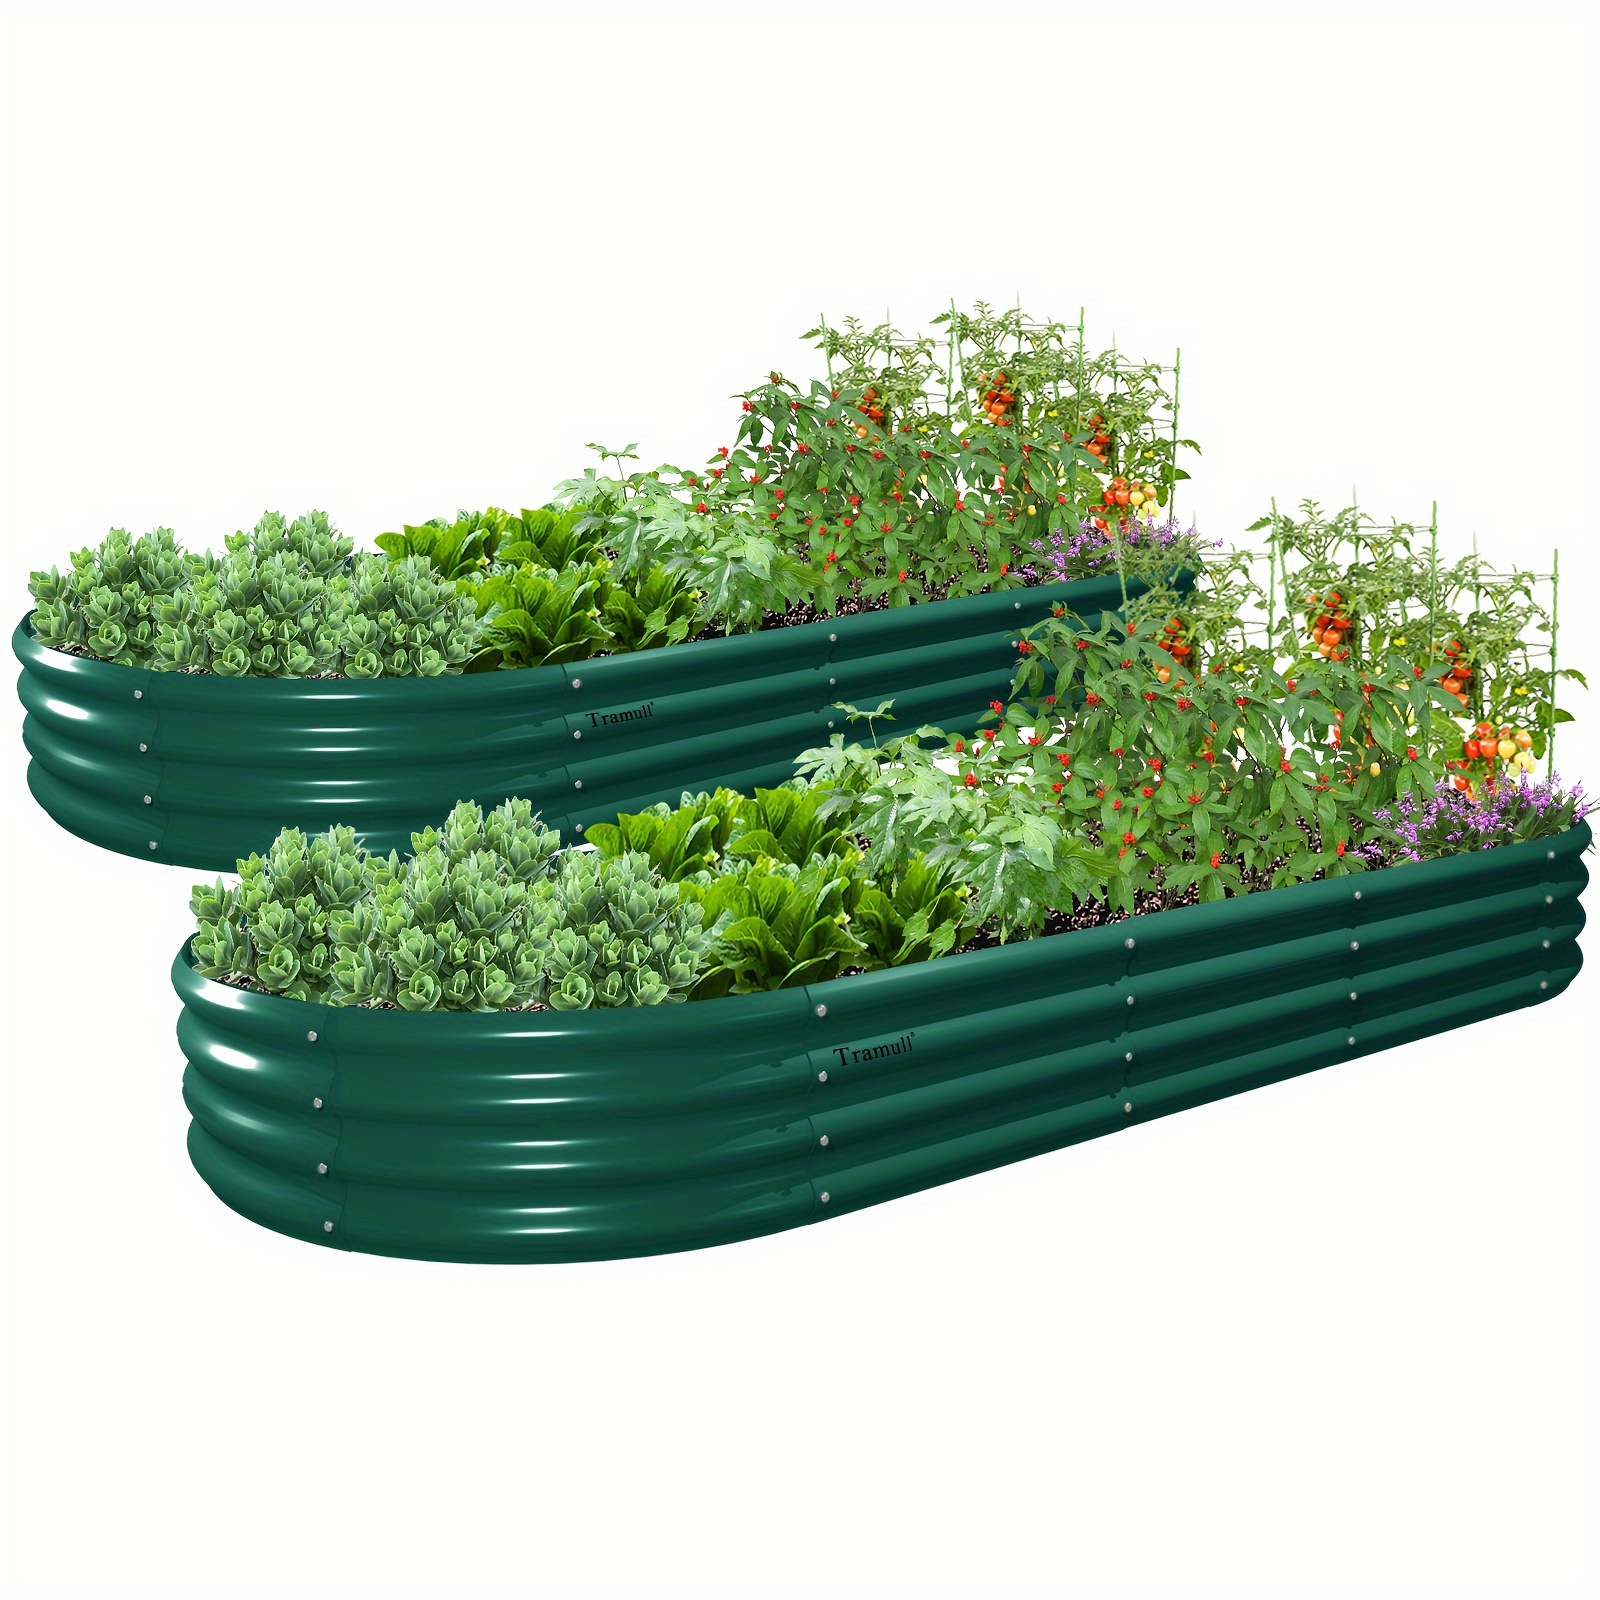 

2 Pack 8x3x1ft Galvanized Raised Garden Bed Large Metal Planter Box Kit Elevated Raised Garden Planters For Outdoor Plants